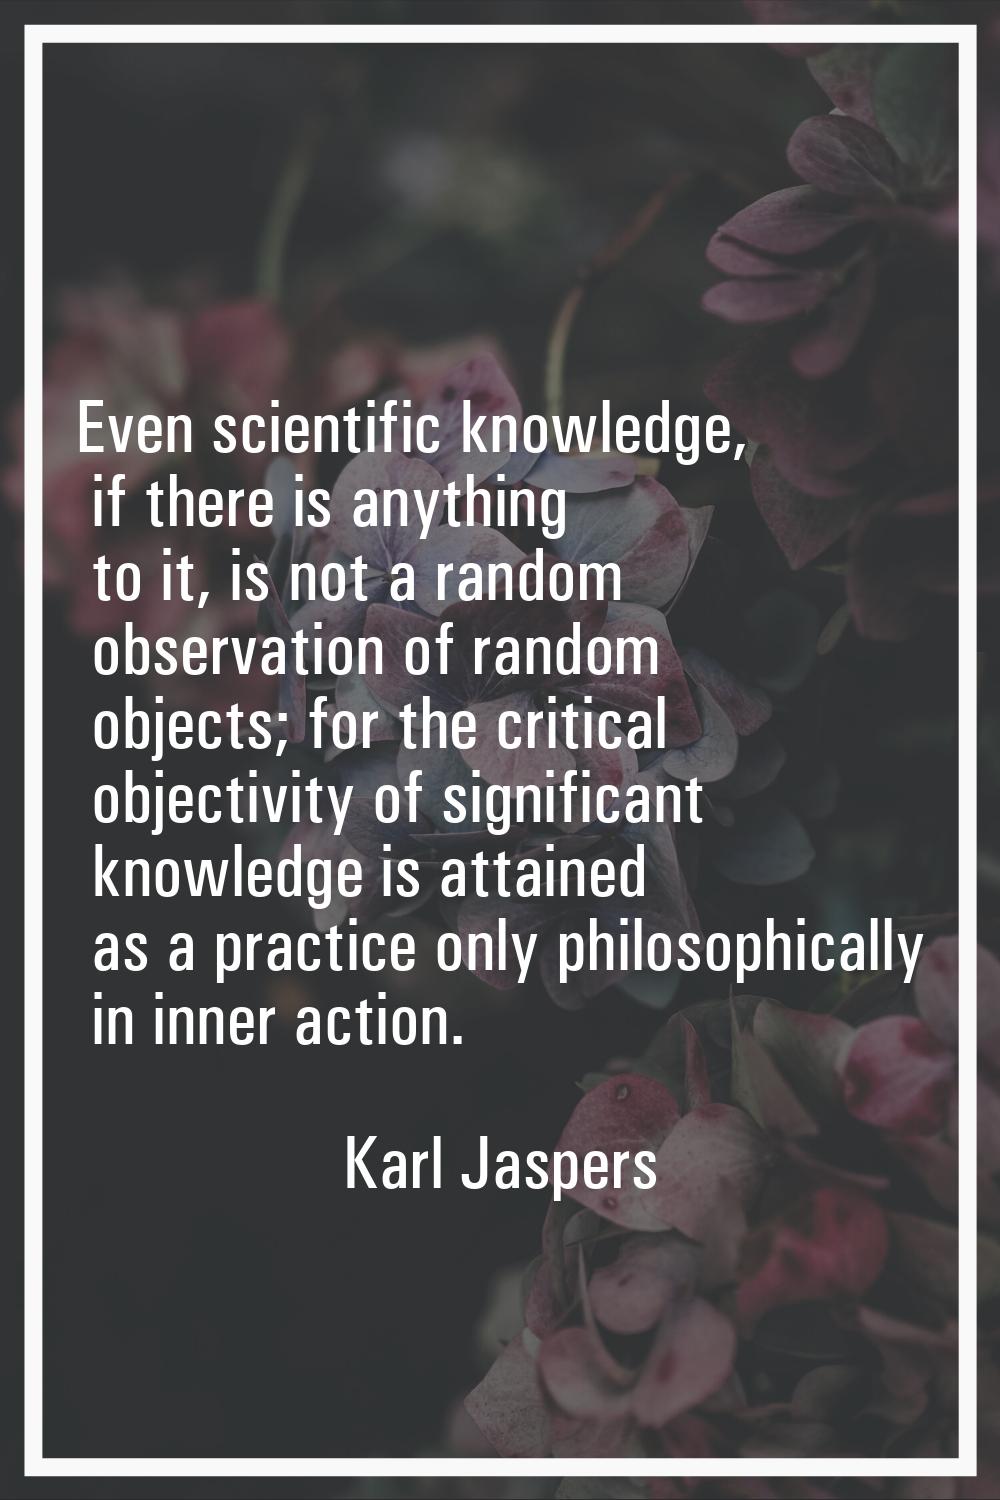 Even scientific knowledge, if there is anything to it, is not a random observation of random object